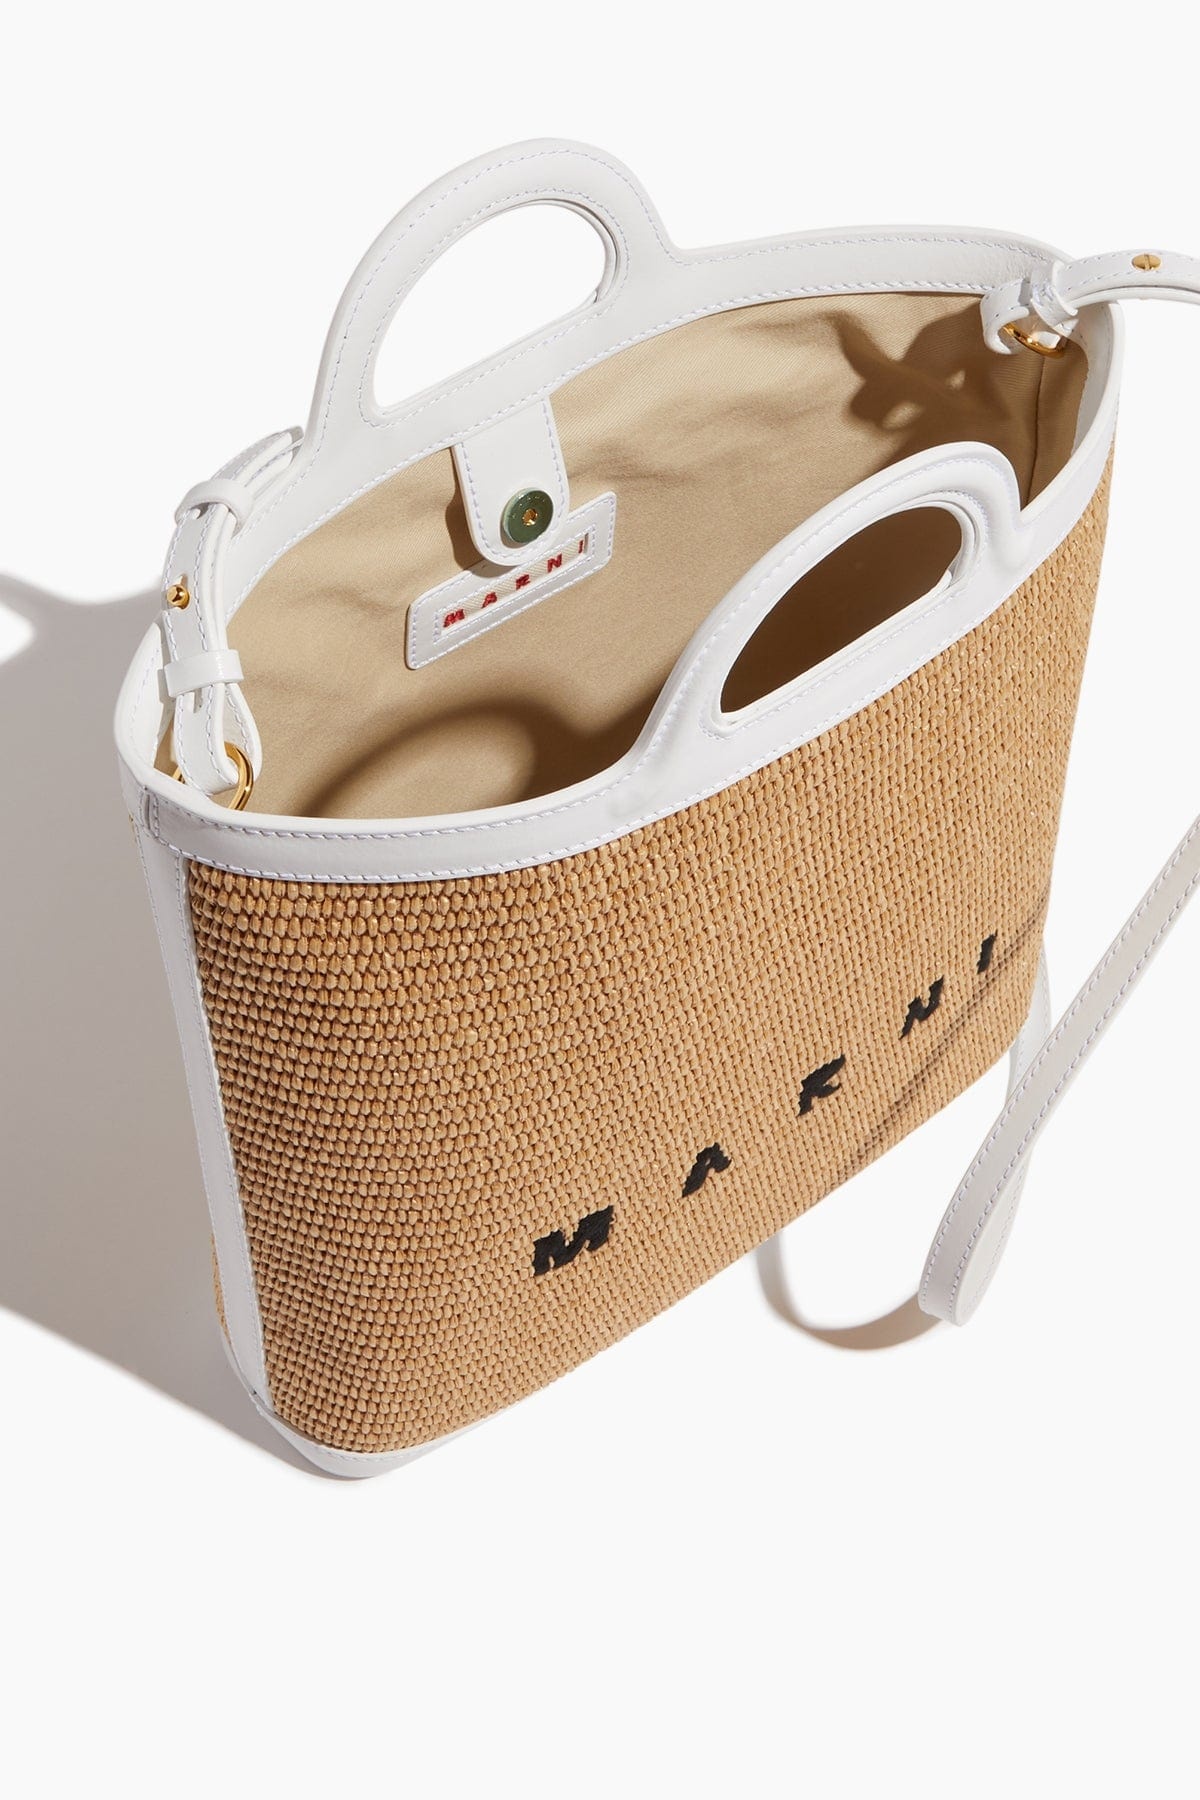 Tropicalia Bucket Bag in Sand Storm/Lily White - 5